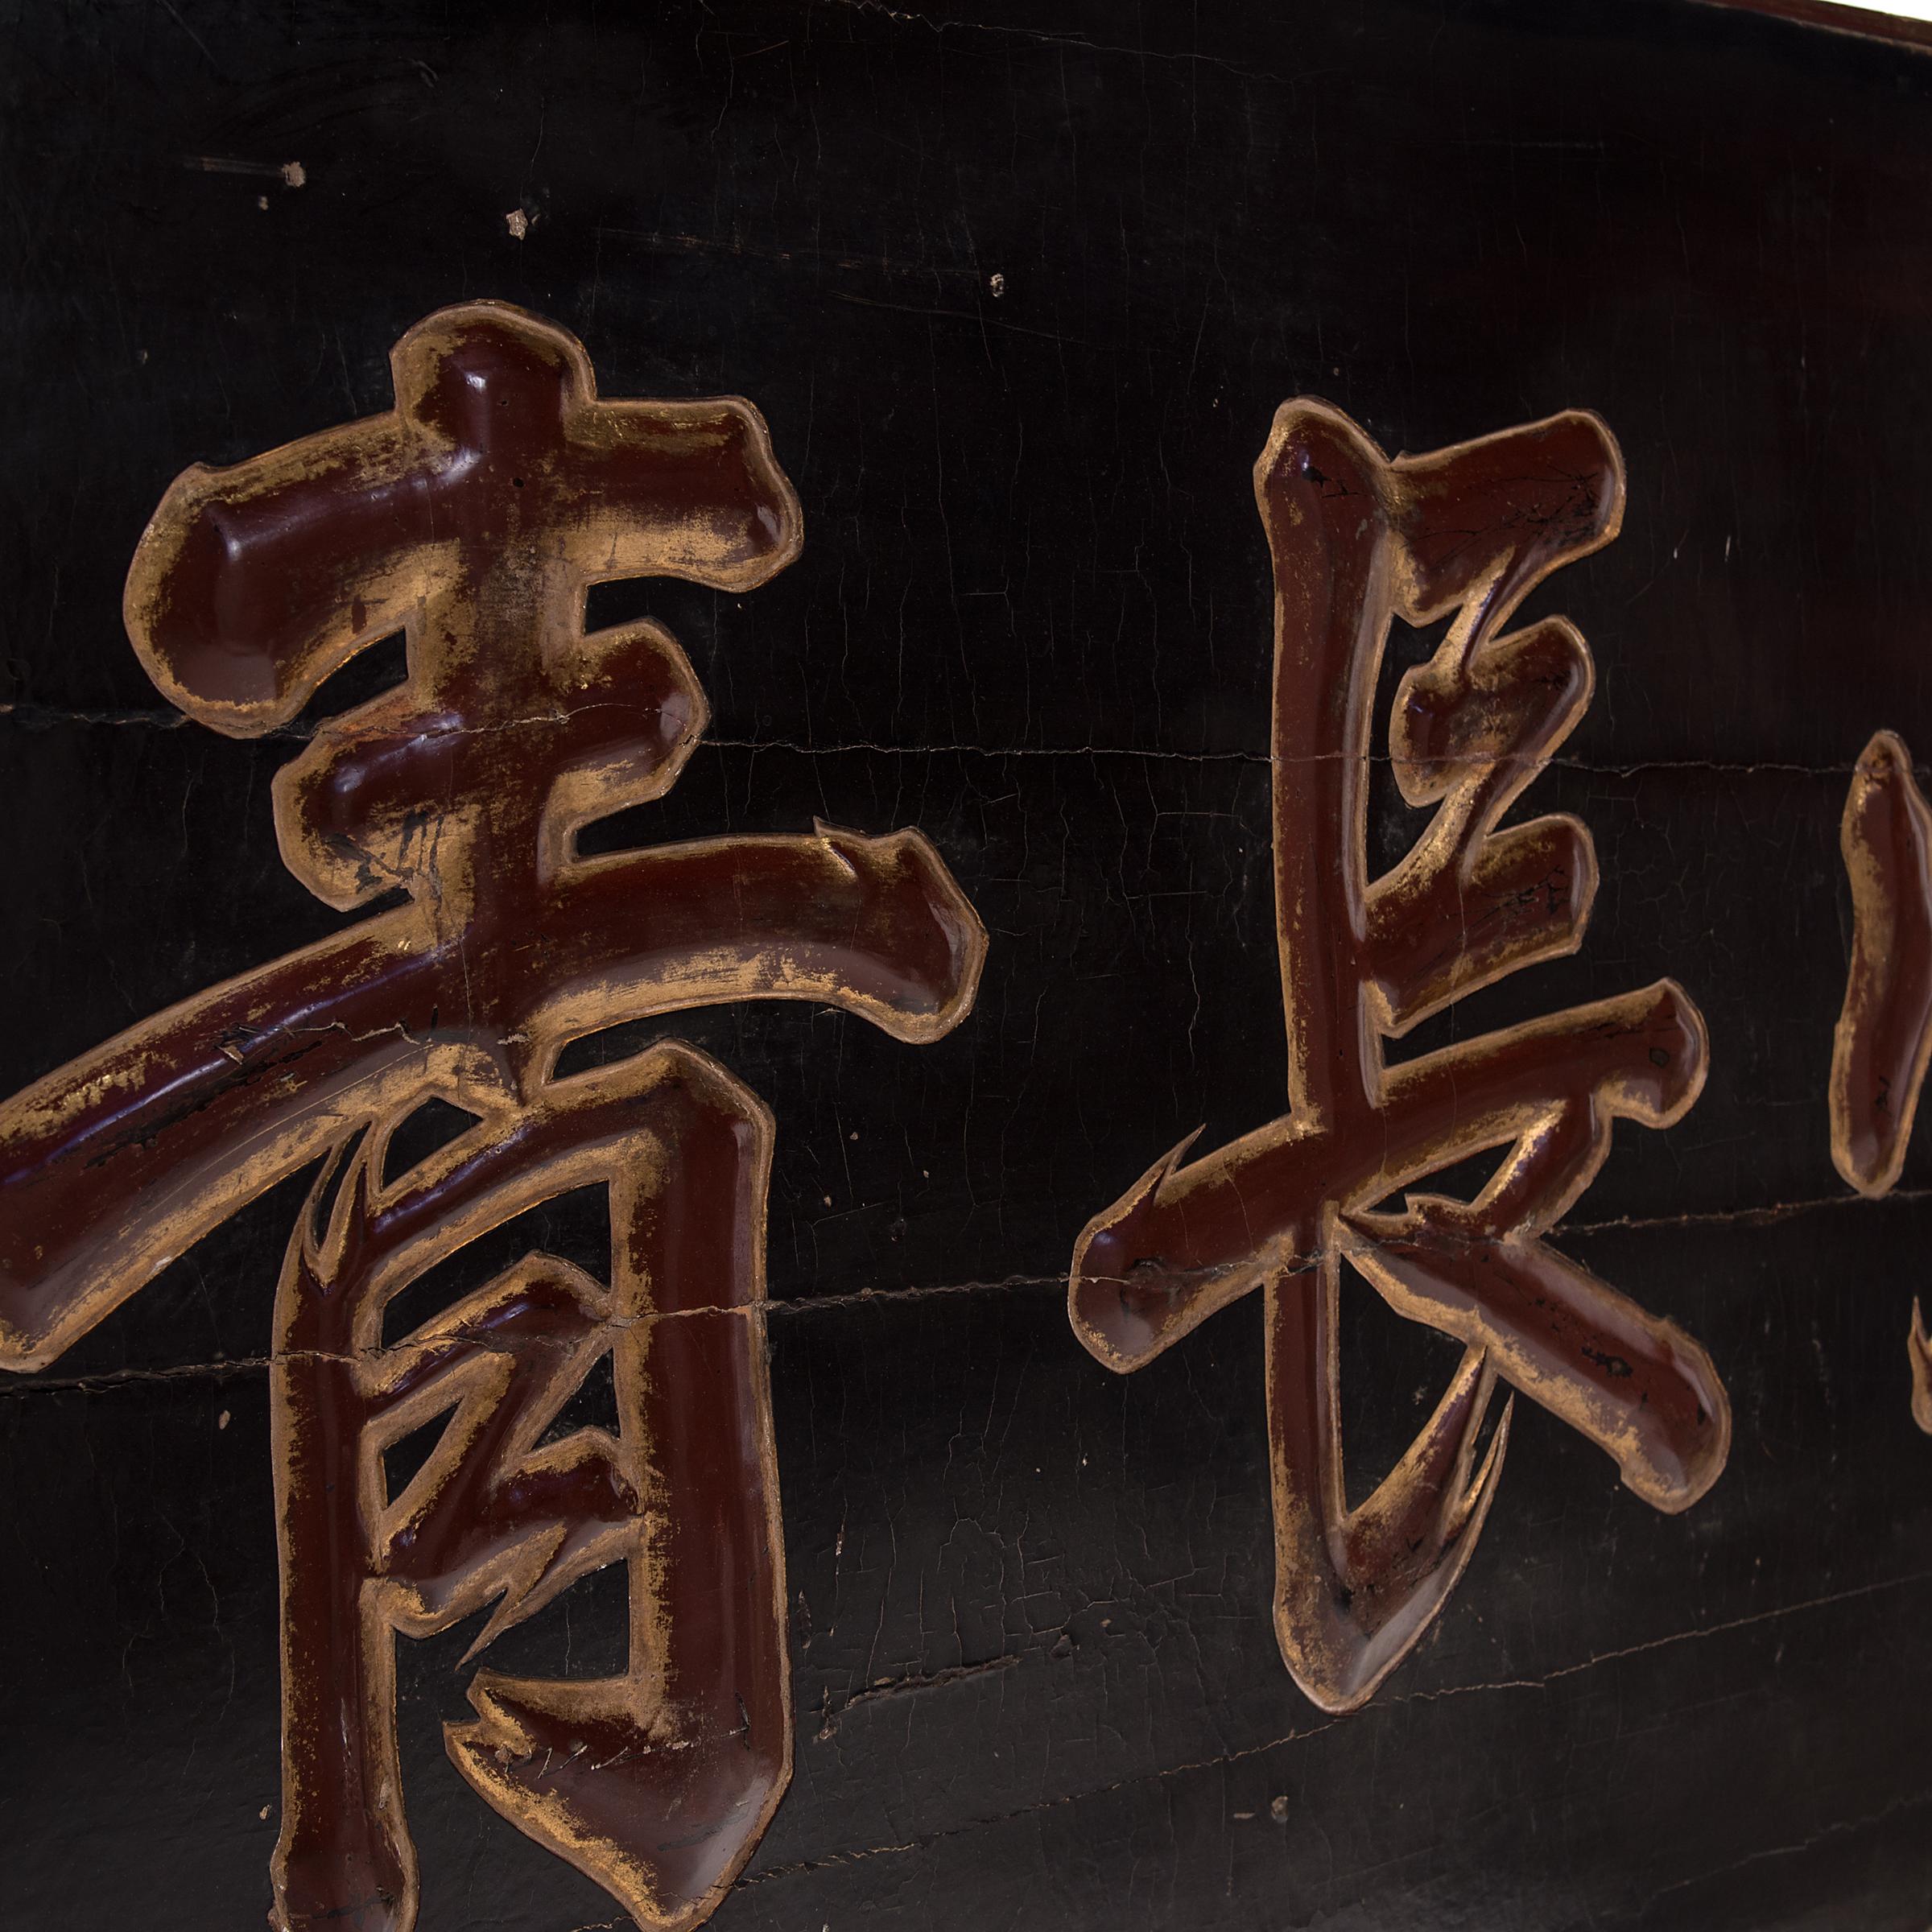 This monumental lacquered elmwood sign of honor was carved in northern China during the mid-19th century. The large central characters read as 